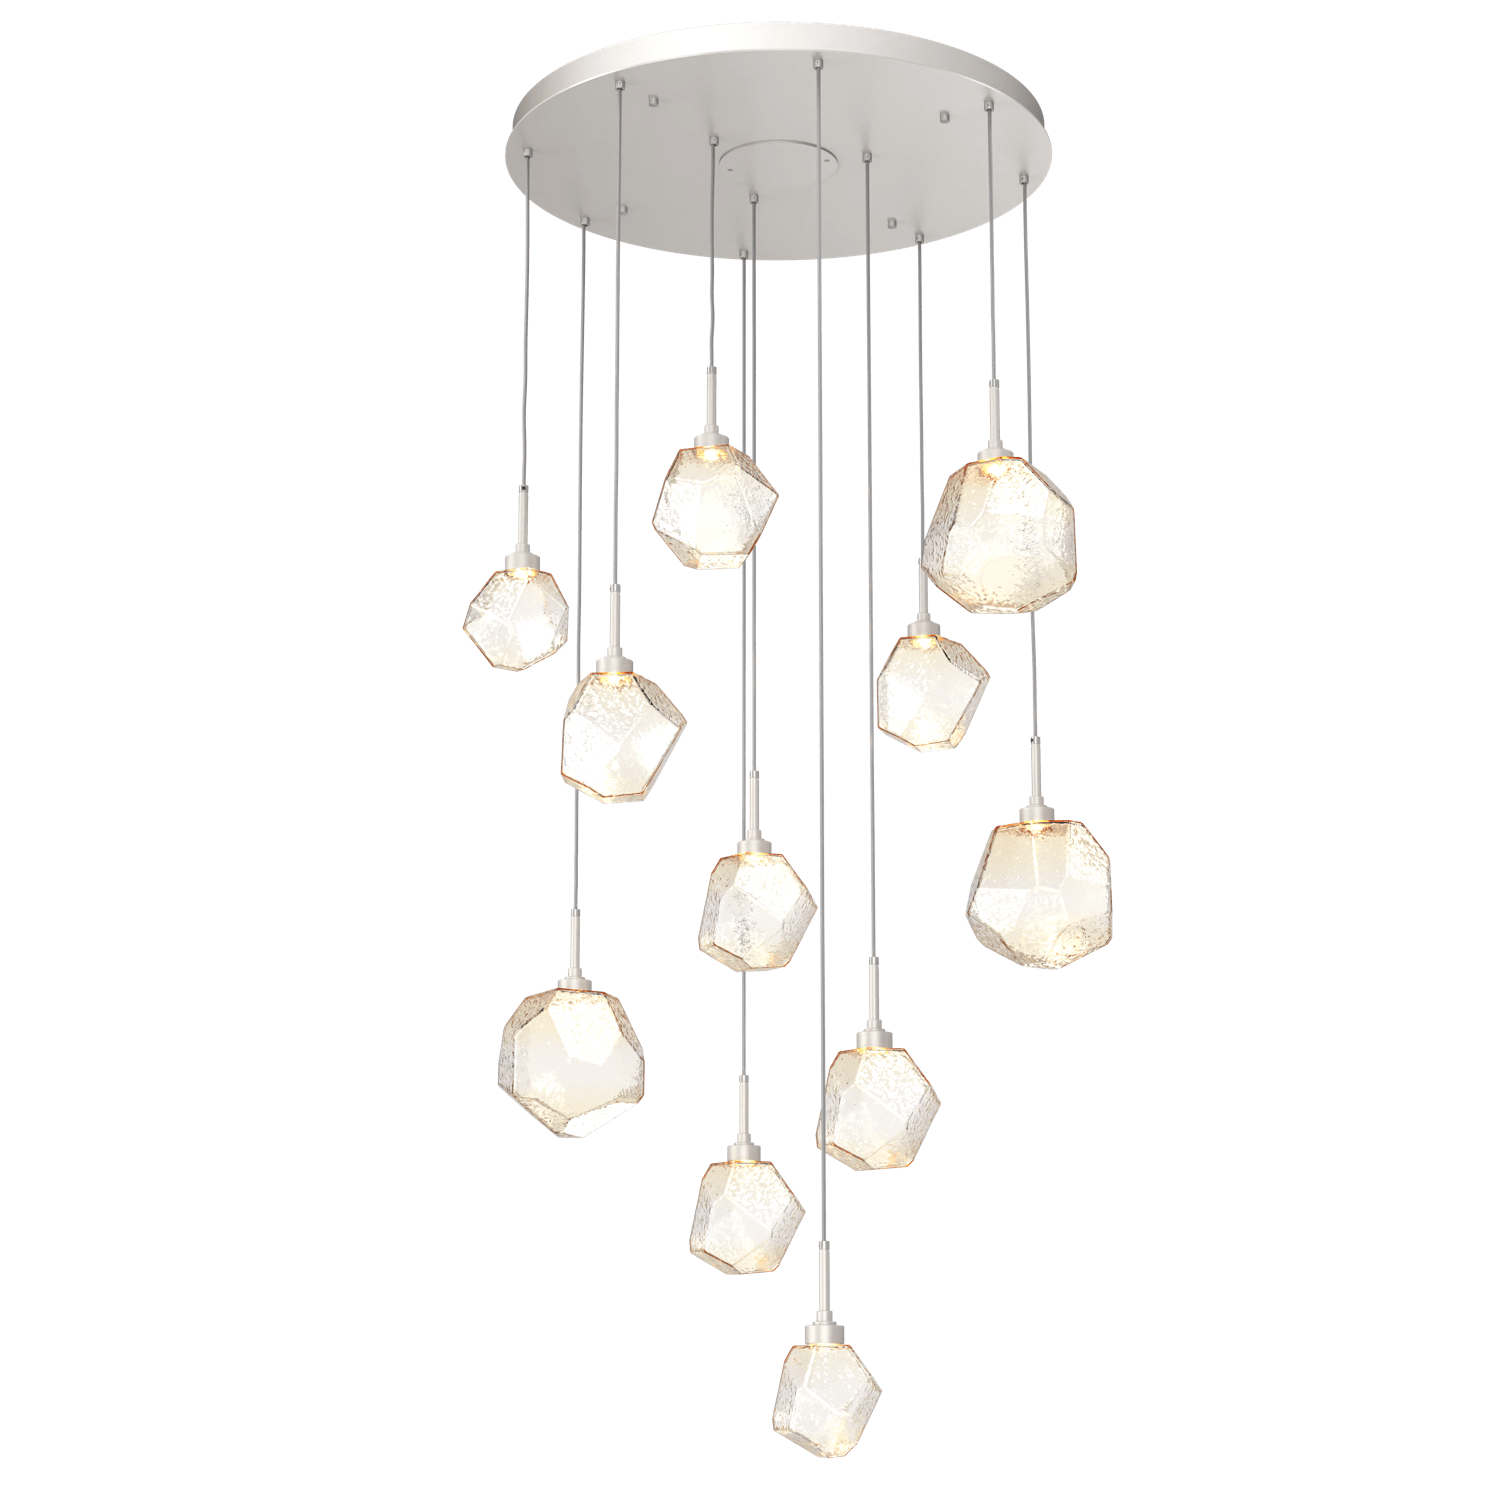 CHB0039-11-BS-A-Hammerton-Studio-Gem-11-light-round-pendant-chandelier-with-metallic-beige-silver-finish-and-amber-blown-glass-shades-and-LED-lamping